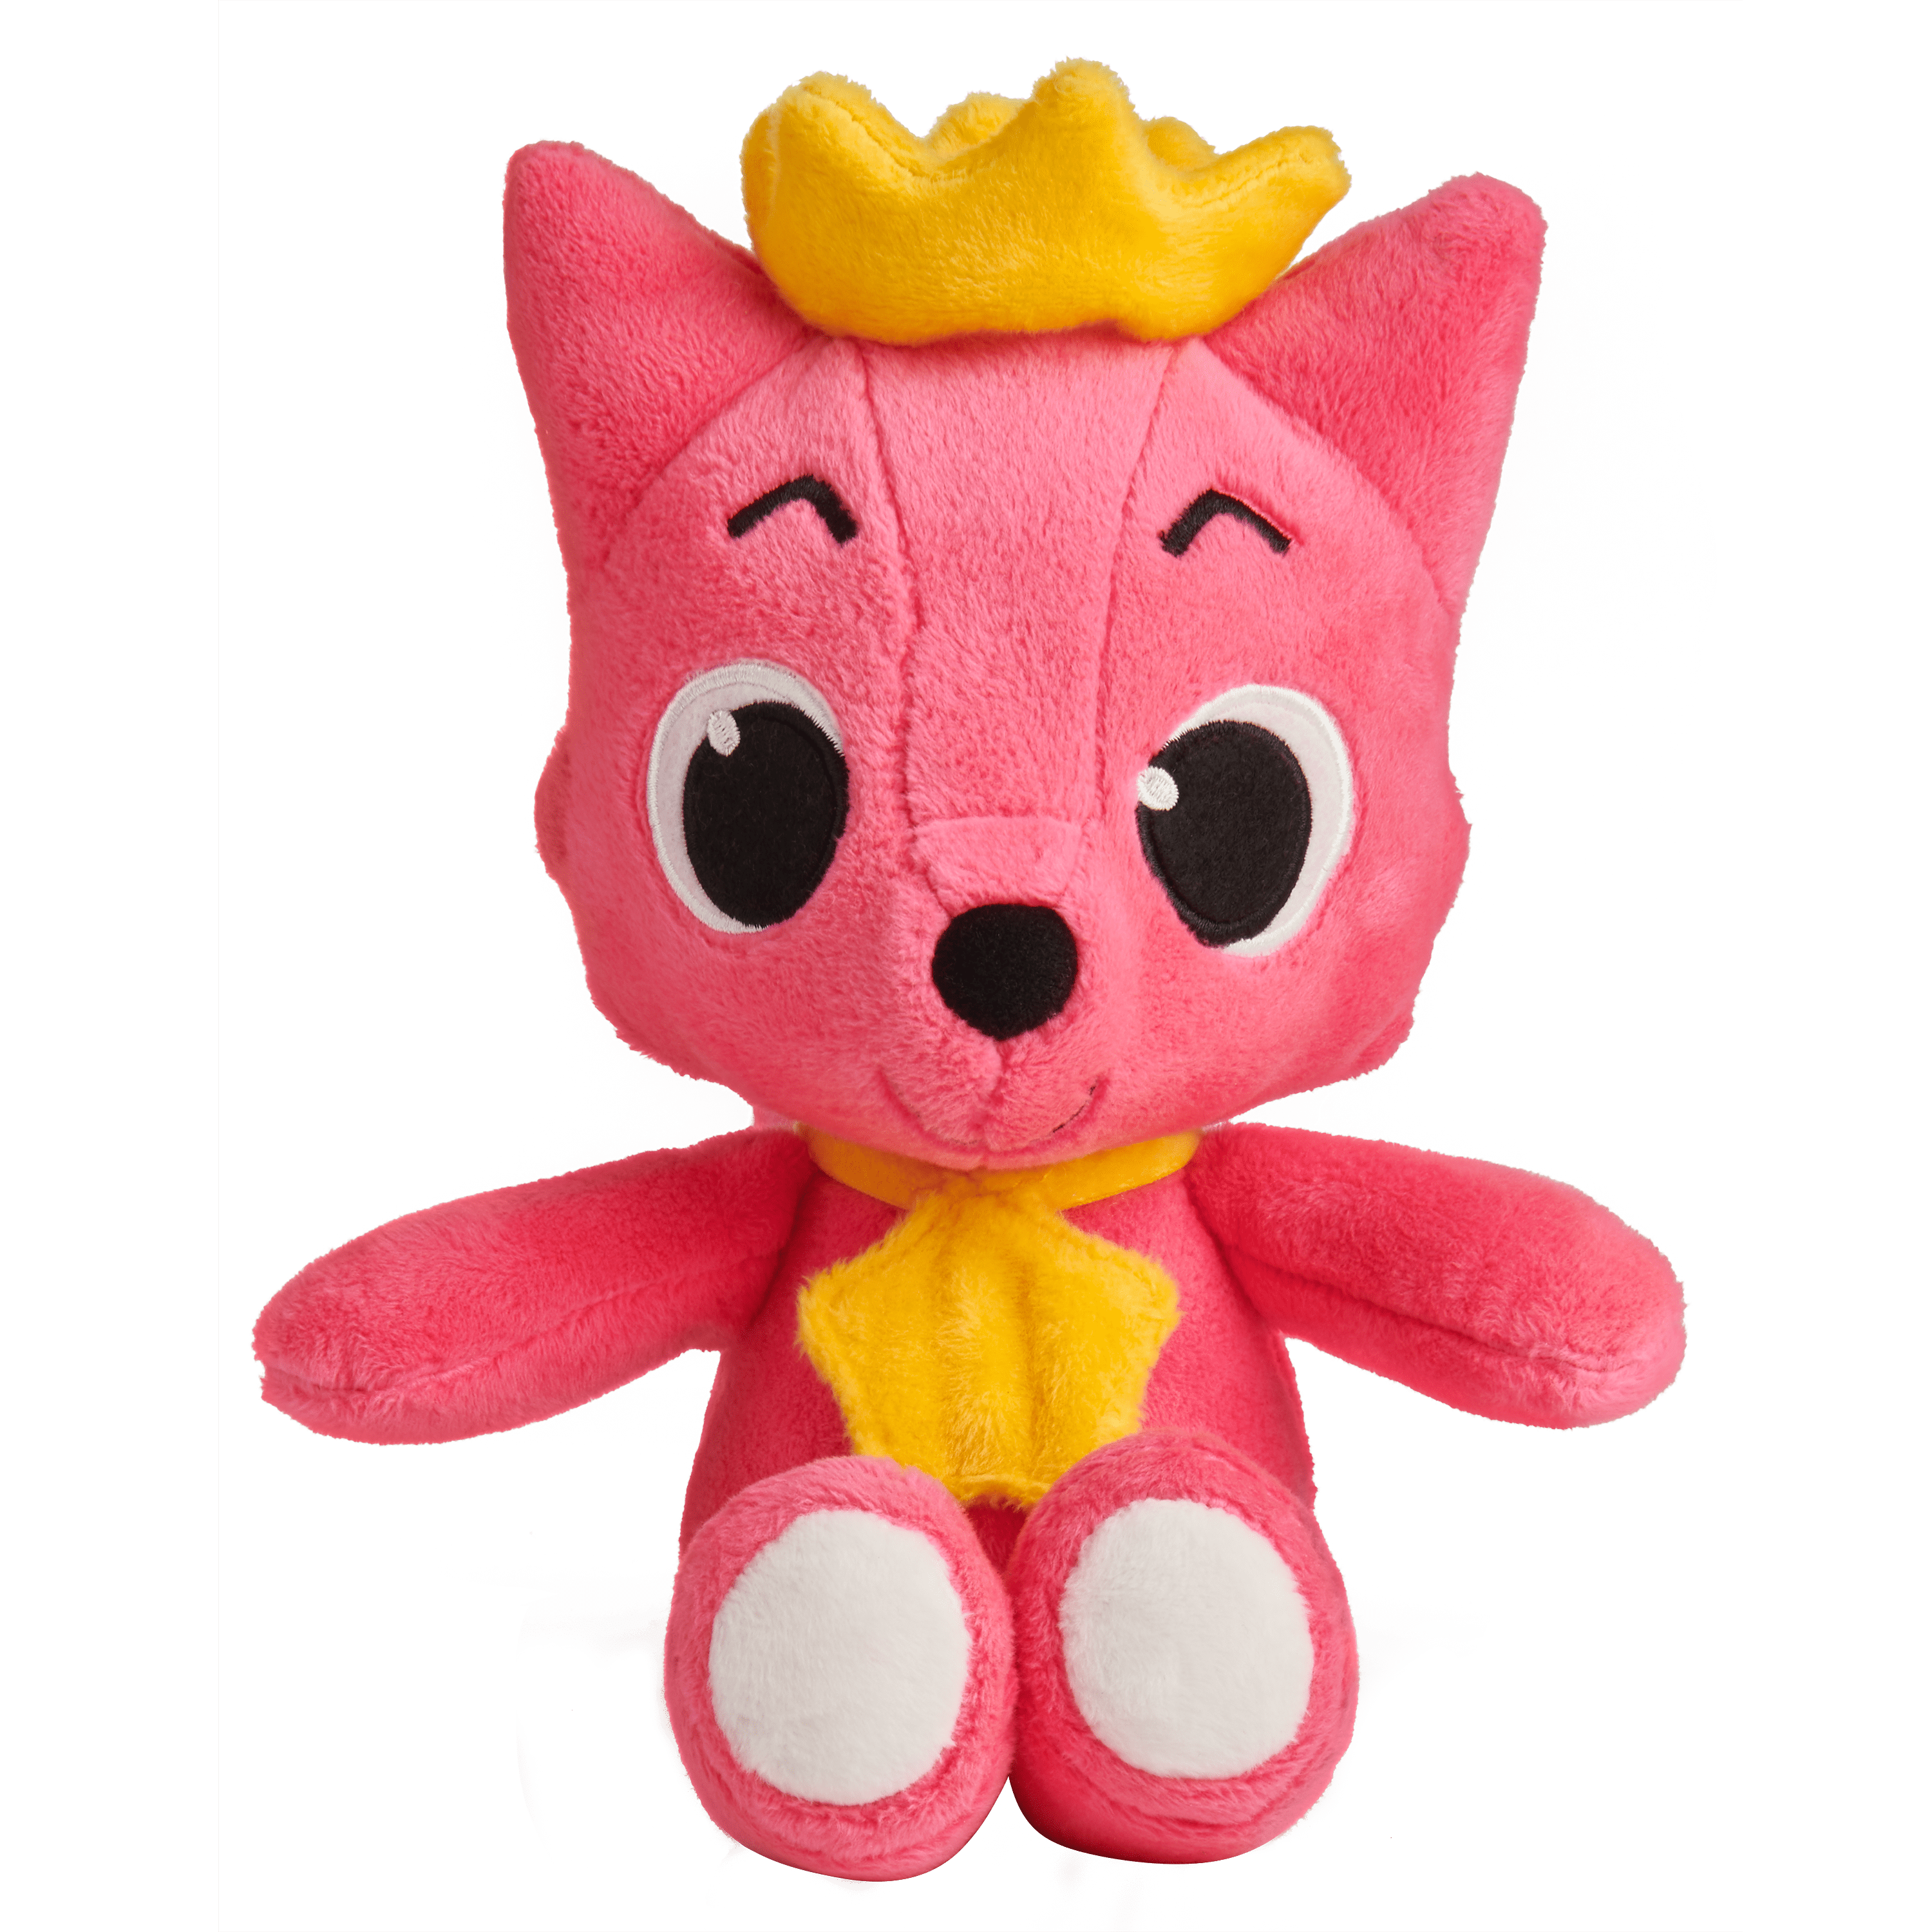 Pinkfong Cute Big Head Doll 29cm Pink Stuffed Toy Safety Packing PINKFONG 